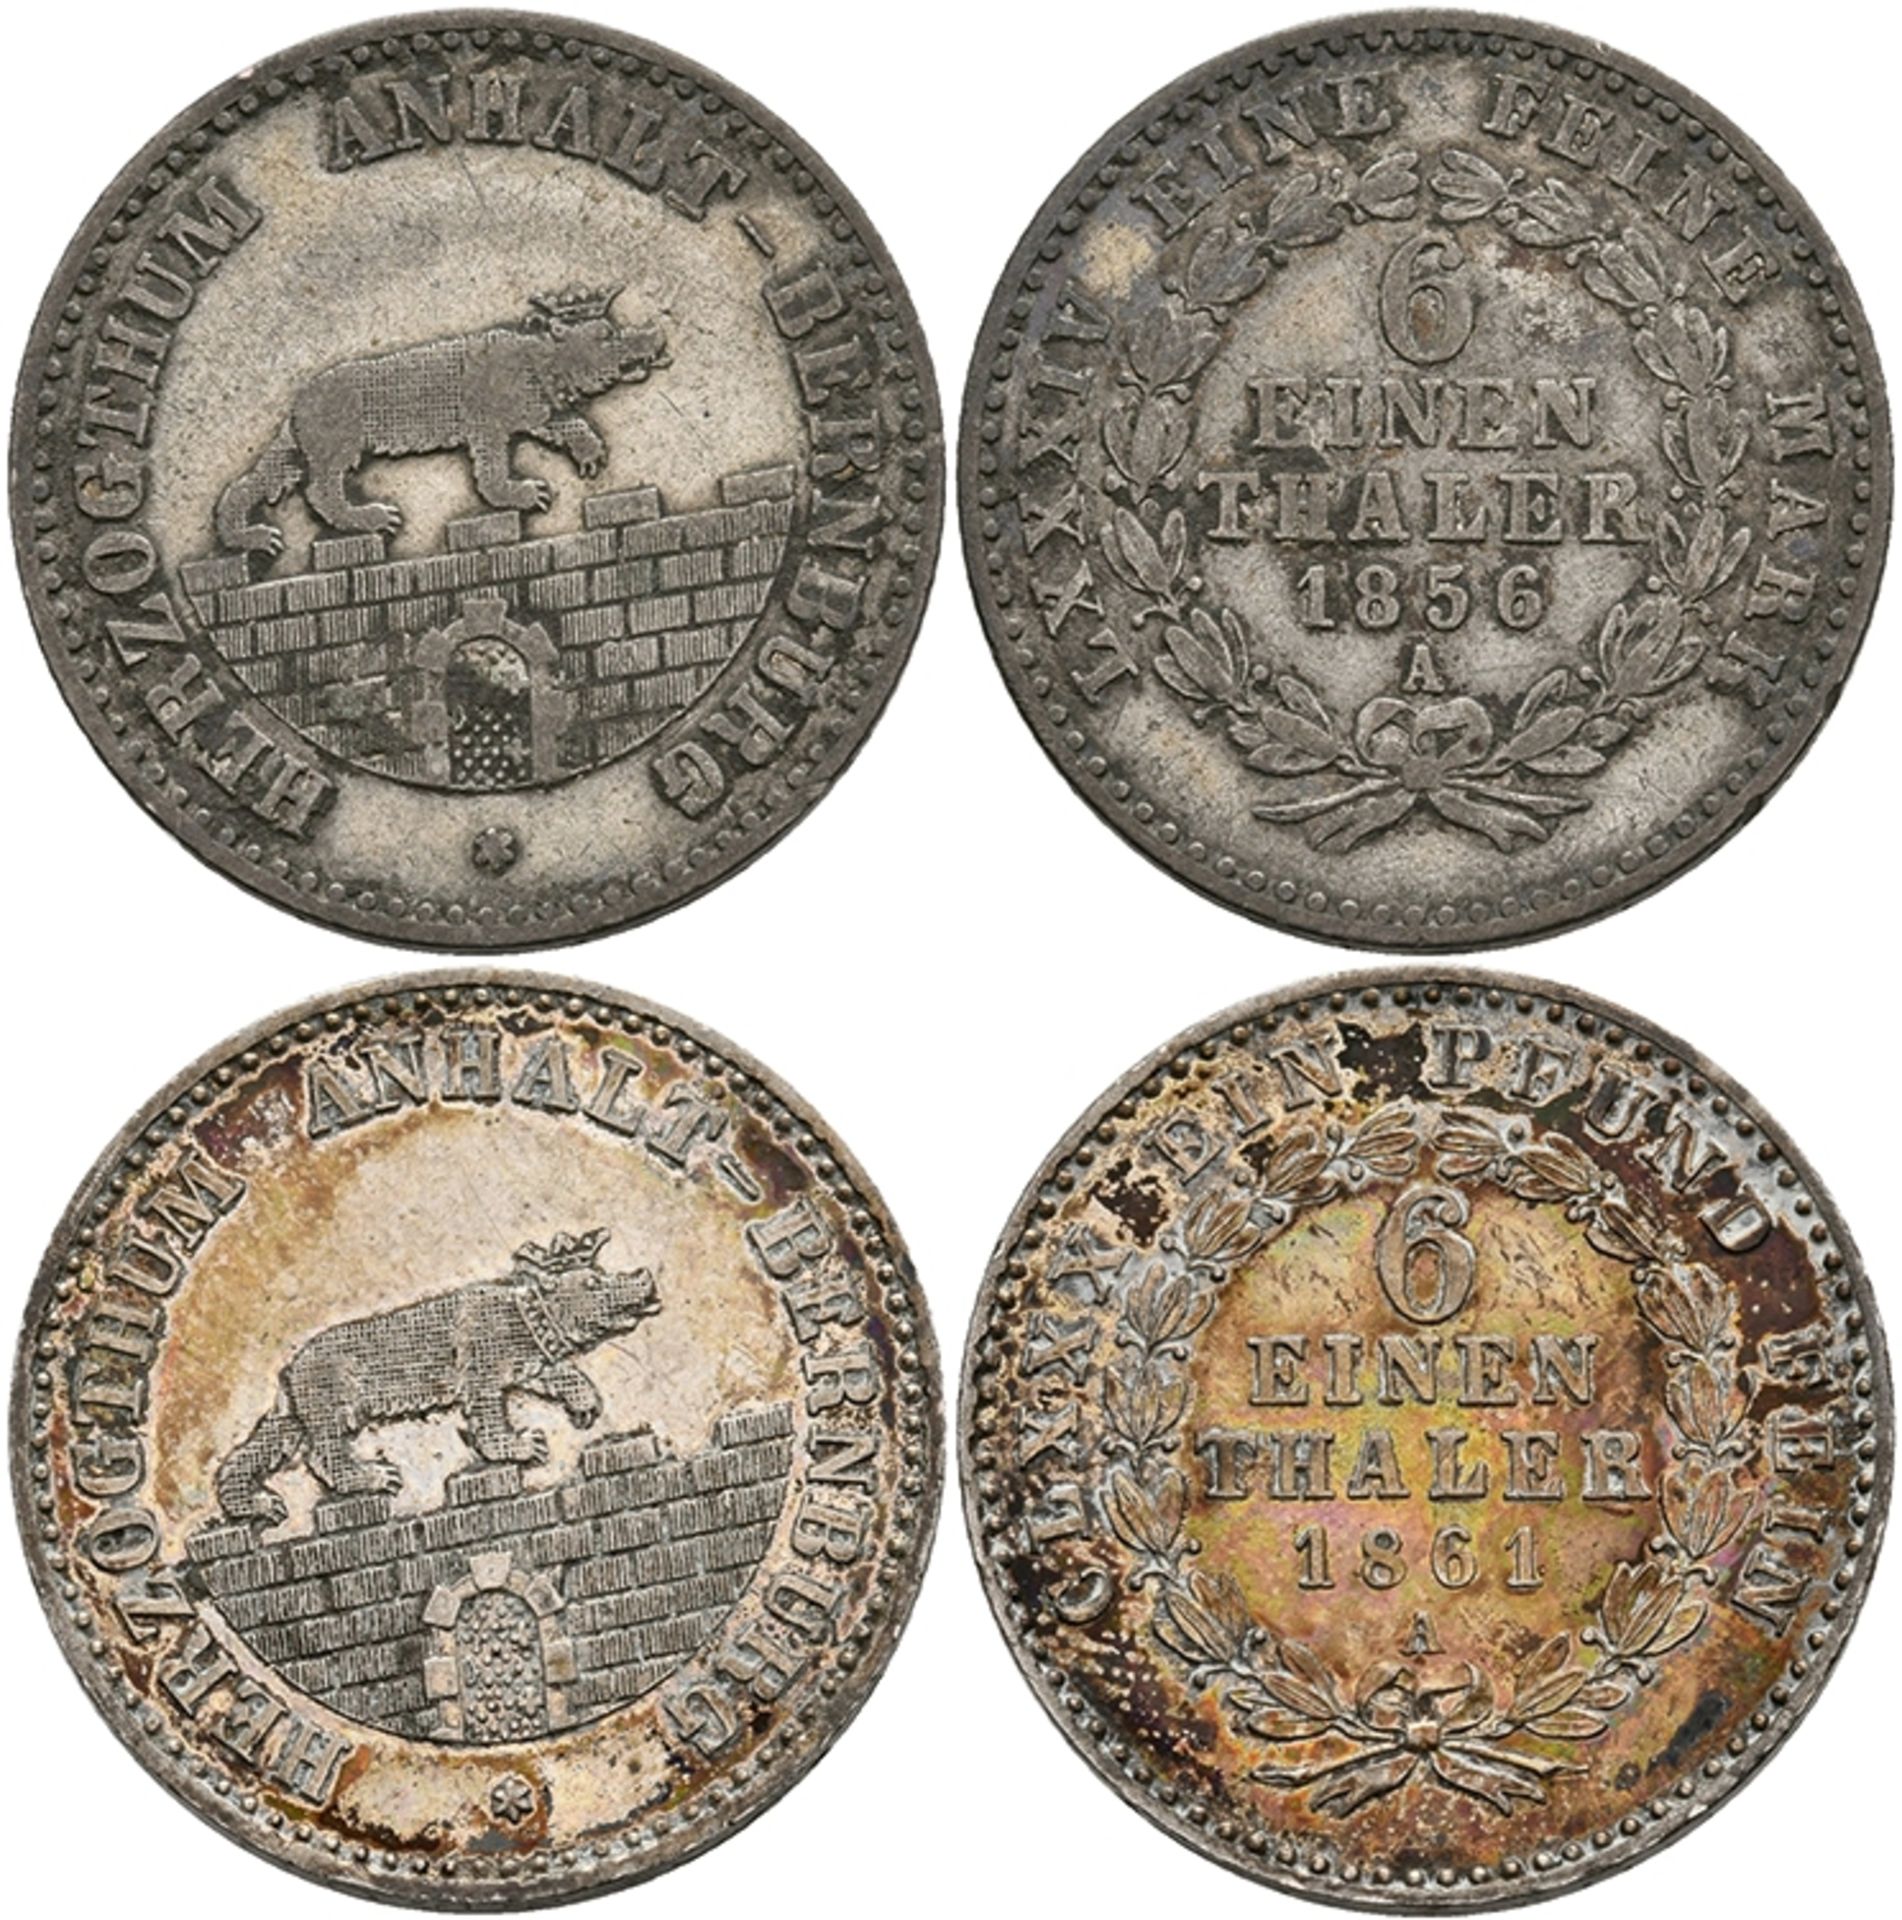 1 / 6 thaler 1856 and 1861, 2 pieces, PPC's 18 / J 65 very fine and PPC's 19 / J. 71 extremly fine